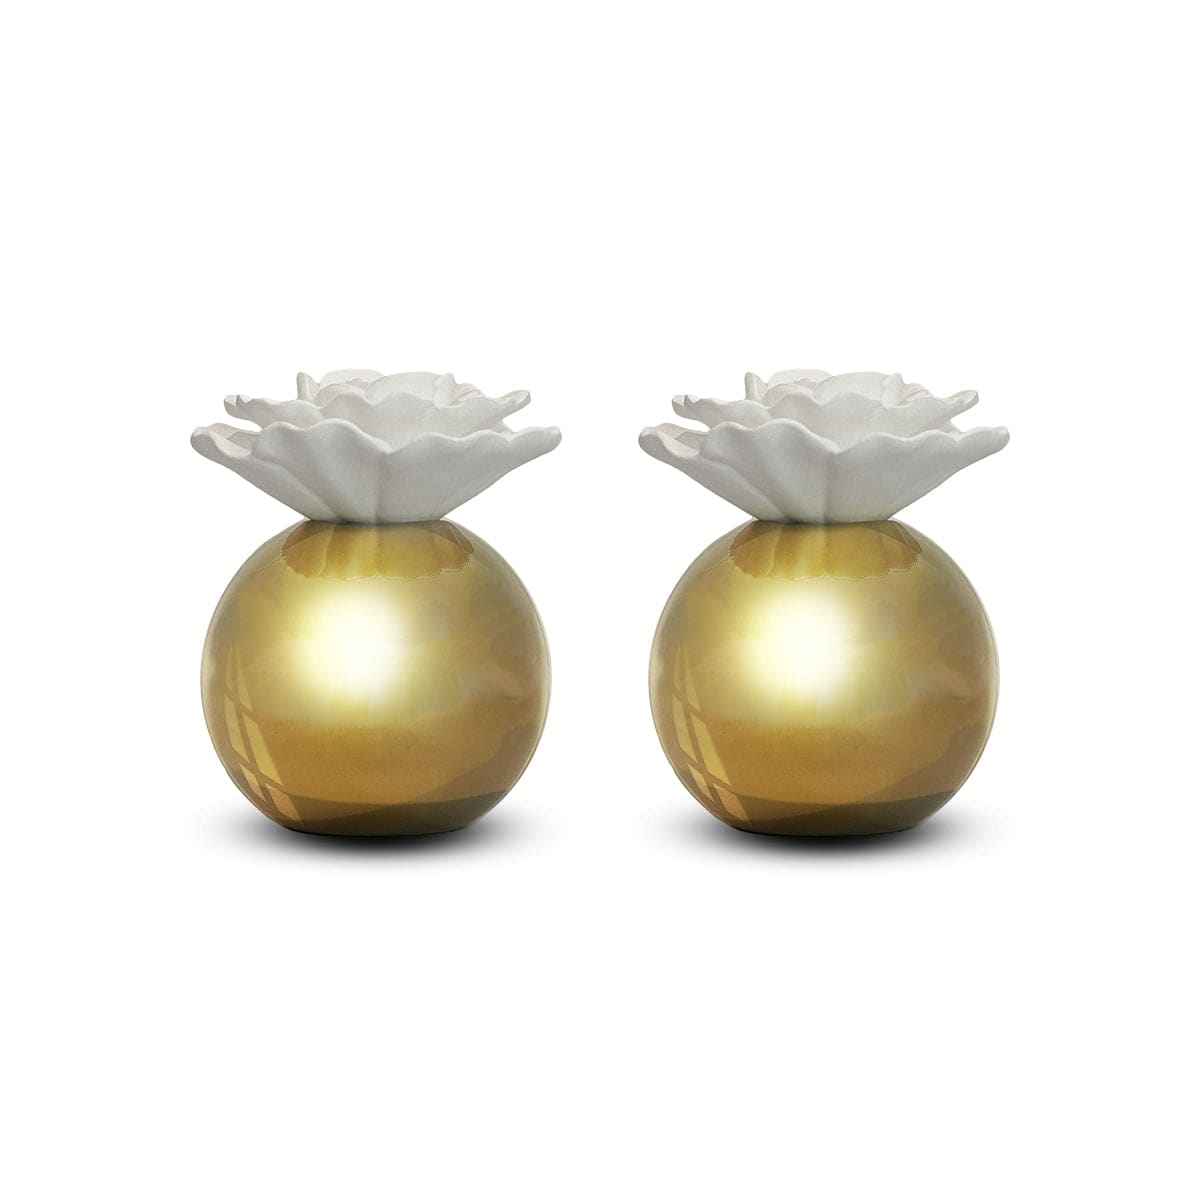 Hysses Home Scents Orion Gold Clay Diffuser Set of 2, Bergamot Sandalwood &amp; Geranium Rosemary